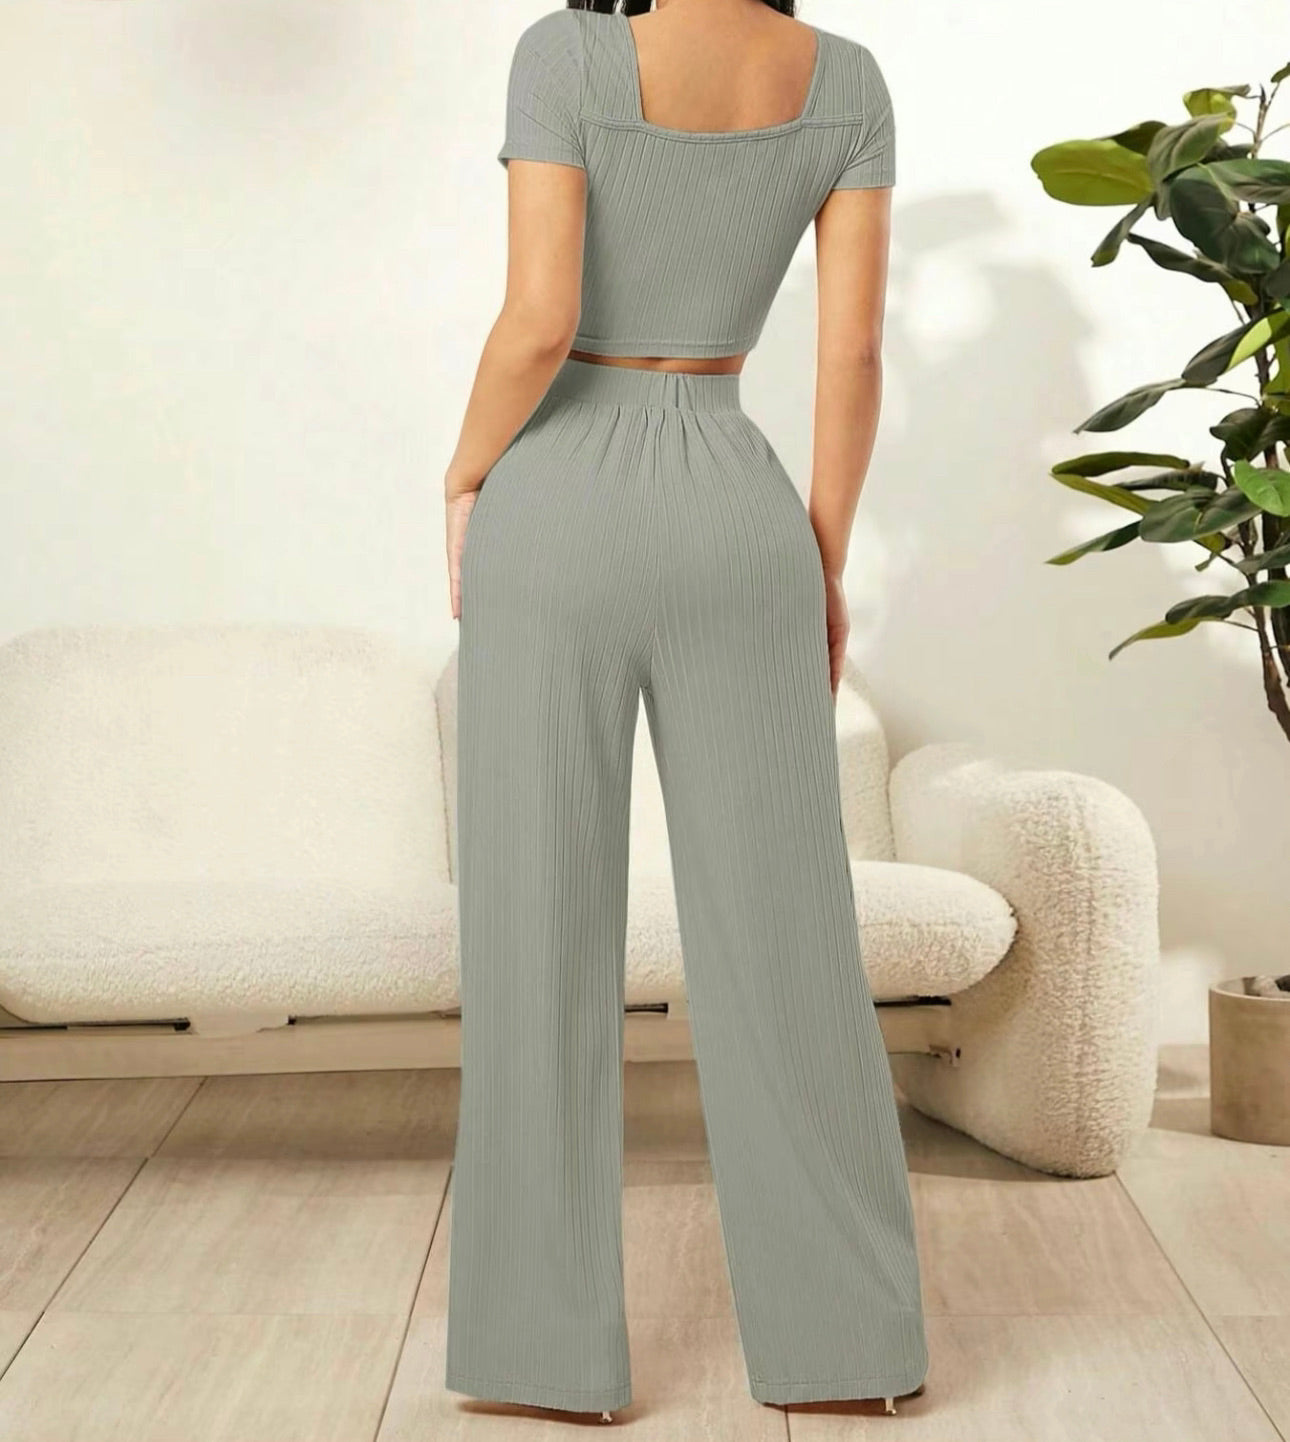 Women's 2pcs Solid Ribbed Crop Tee & High Waist Wide Leg Pants Set, Casual Short Sleeve Square Neck T-Shirt & Ruched Trousers, Summer Clothes for Daily Wear Outdoor